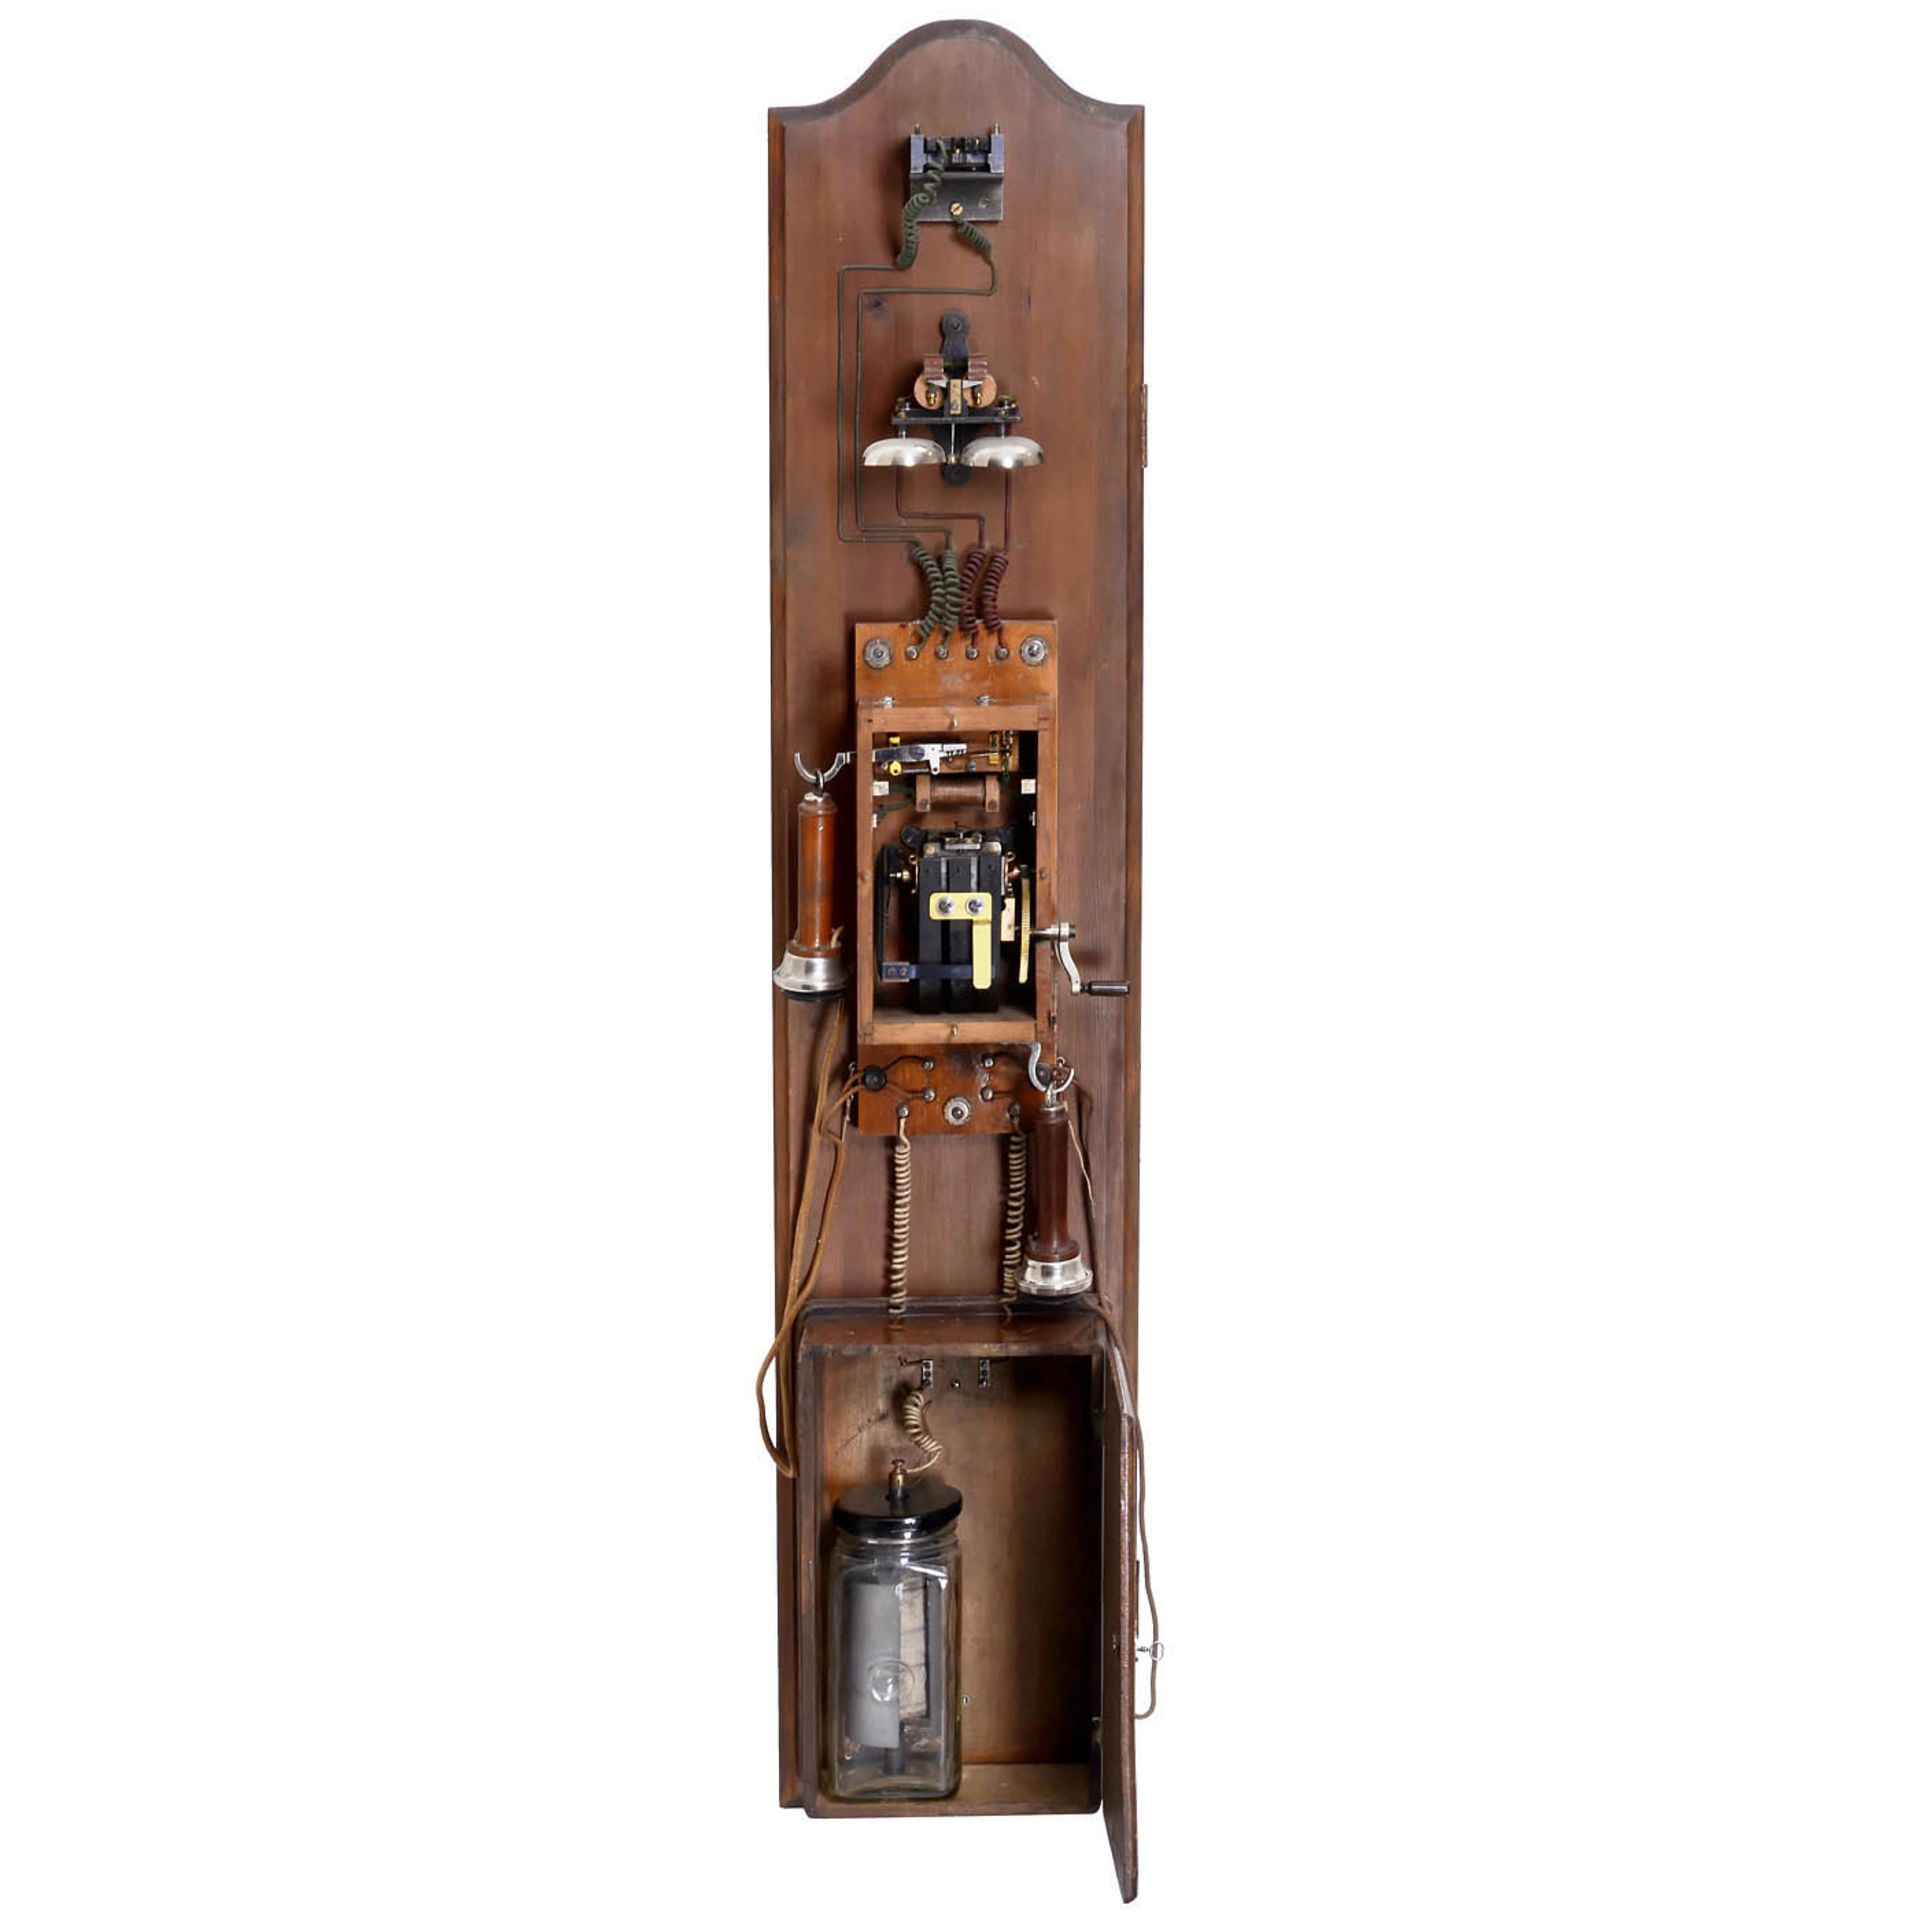 Bavarian Wall-mounted Telephone Station by Reiner, 1892 onwards - Image 3 of 4